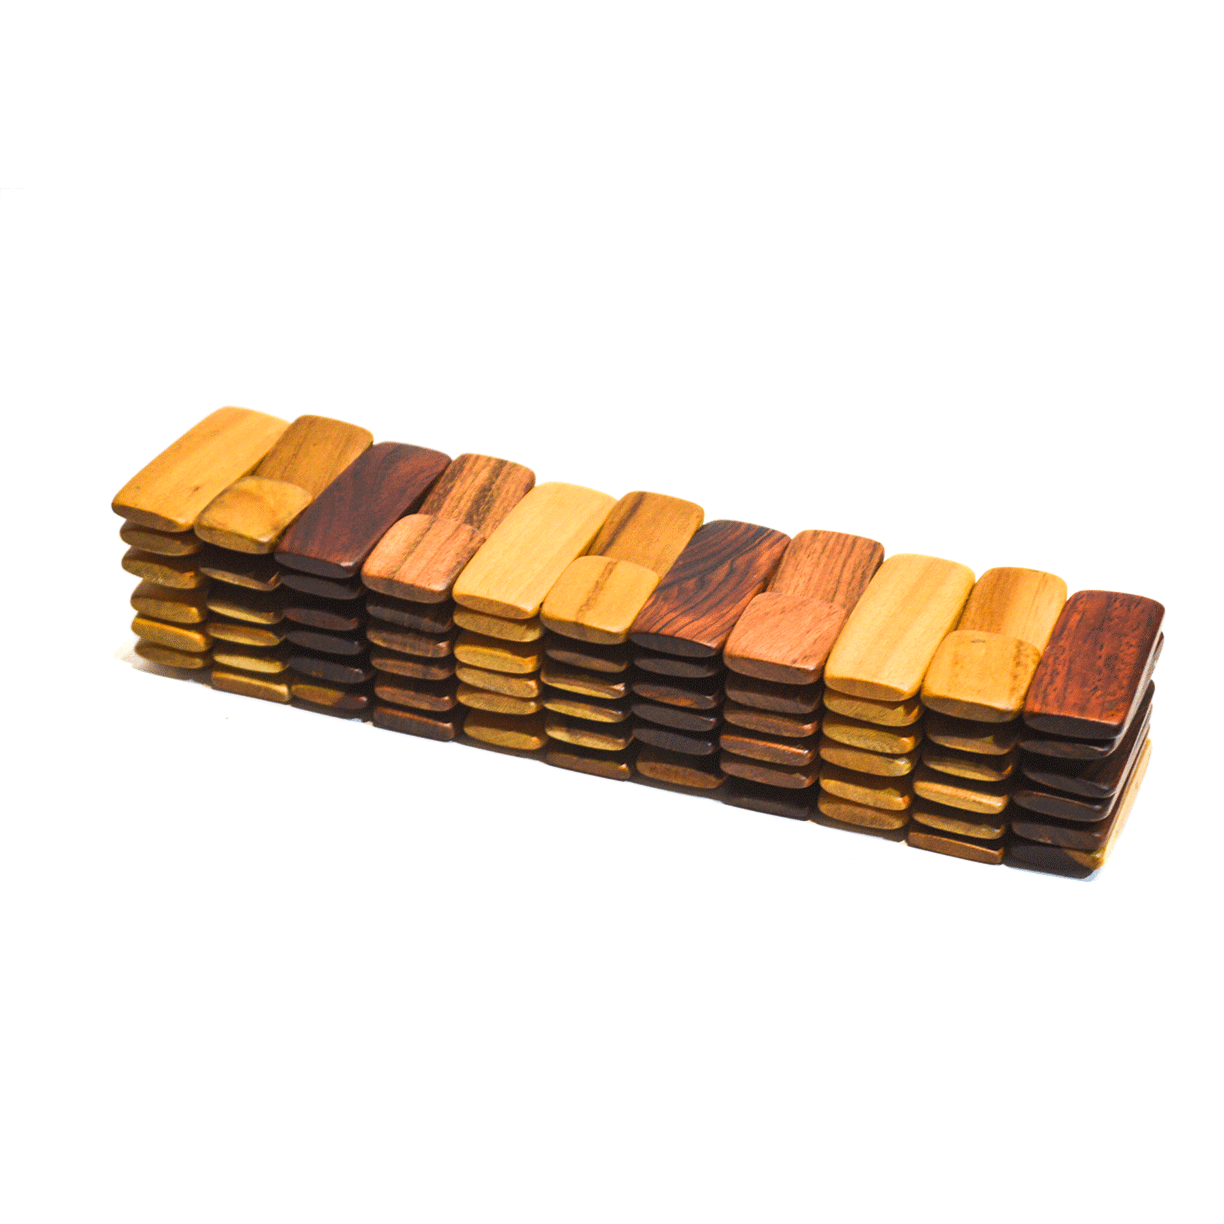 Costa Rican Handmade Foldable Wood Kitchen Placemat